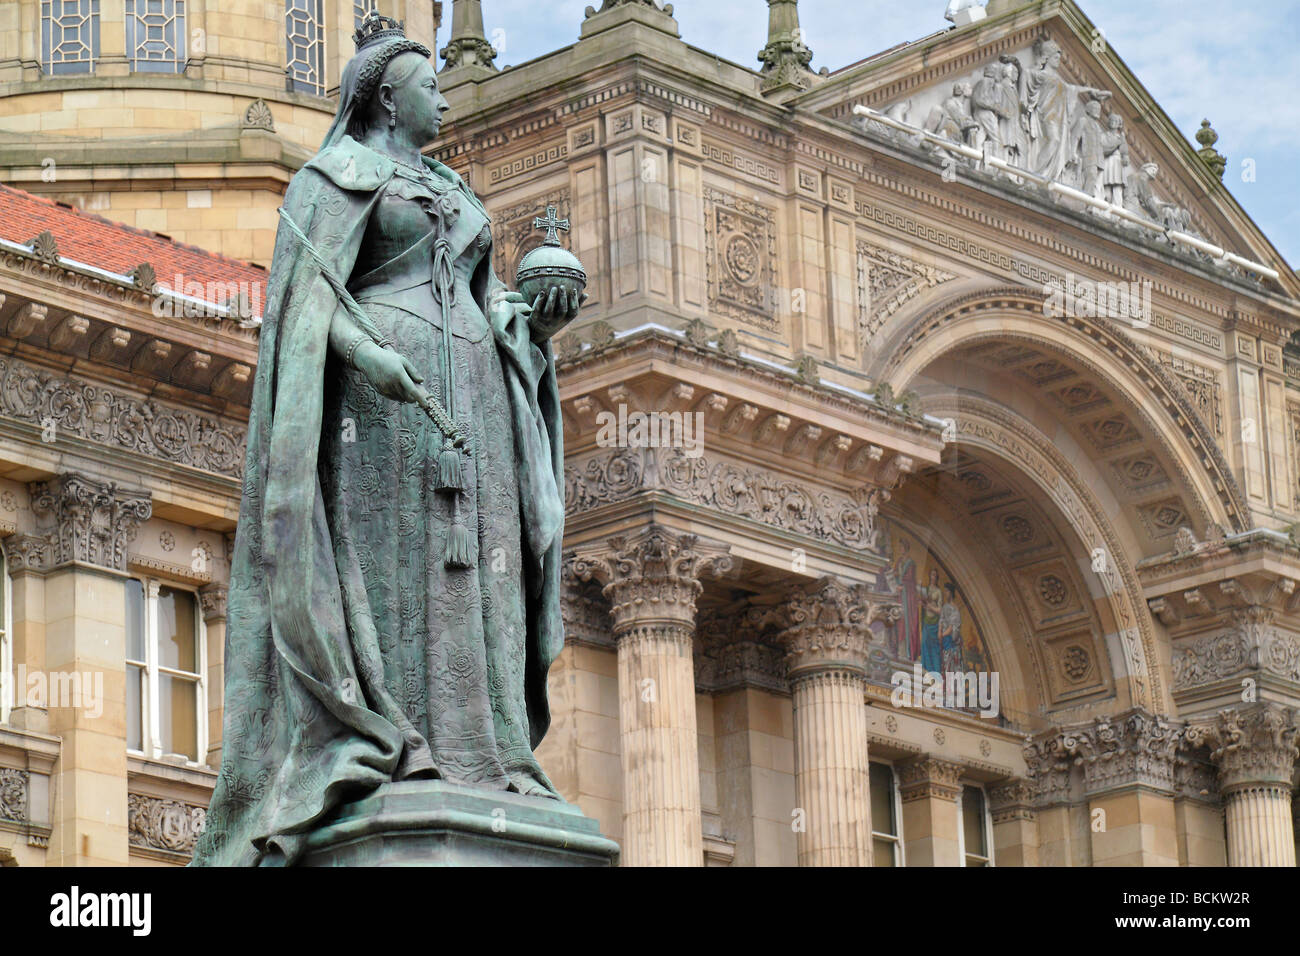 Statue of Victoria in front of the Council House, Birmingham 2 Stock Photo